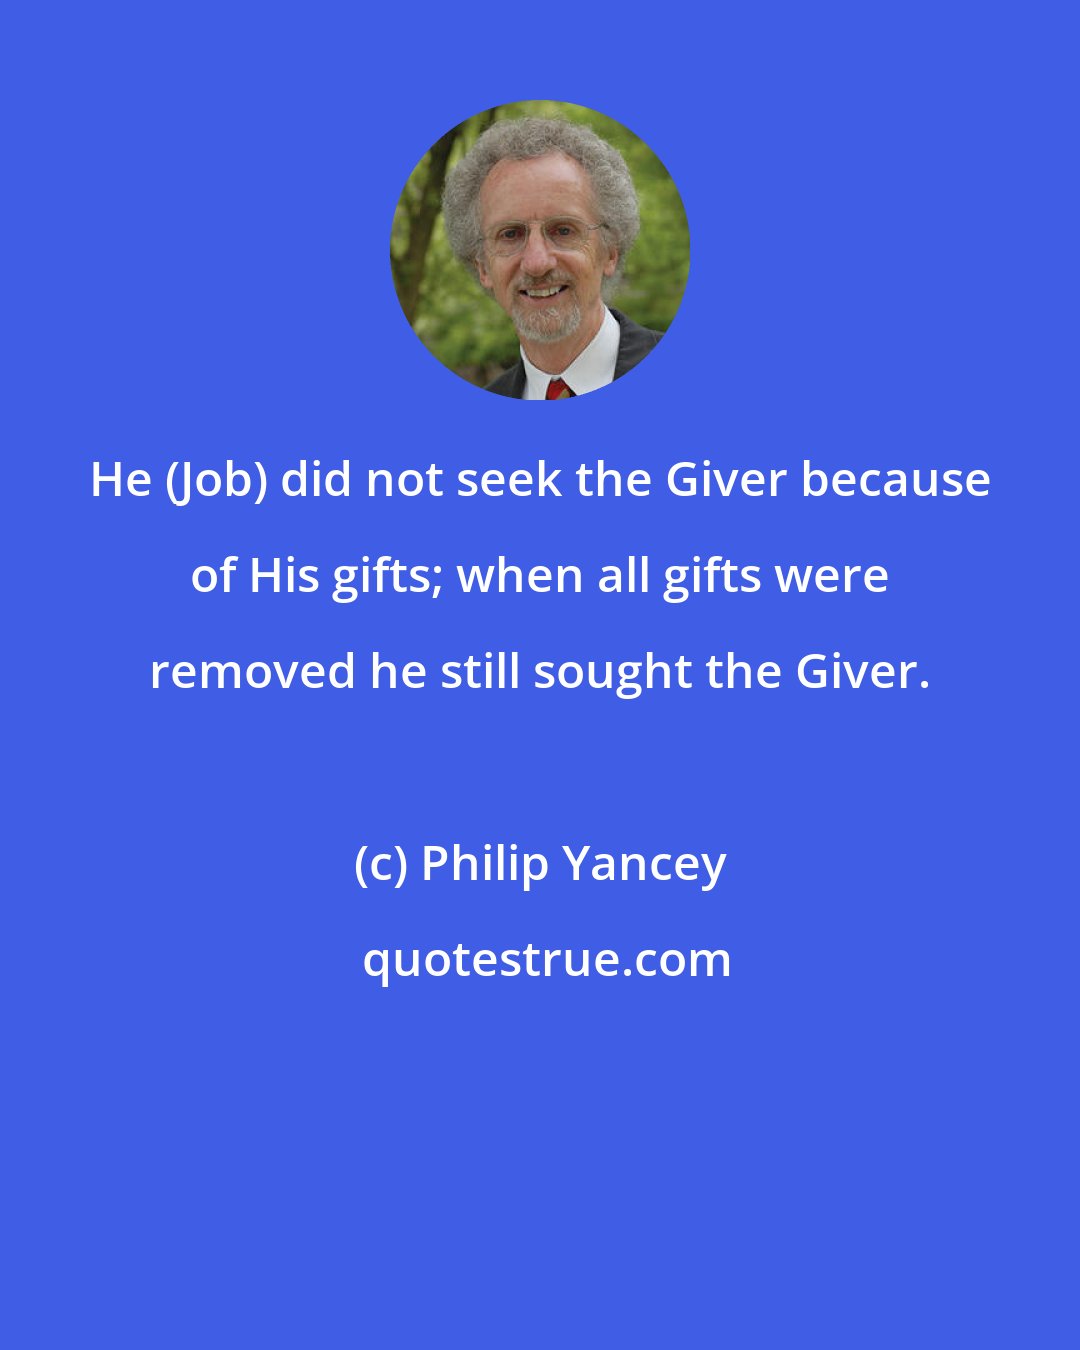 Philip Yancey: He (Job) did not seek the Giver because of His gifts; when all gifts were removed he still sought the Giver.